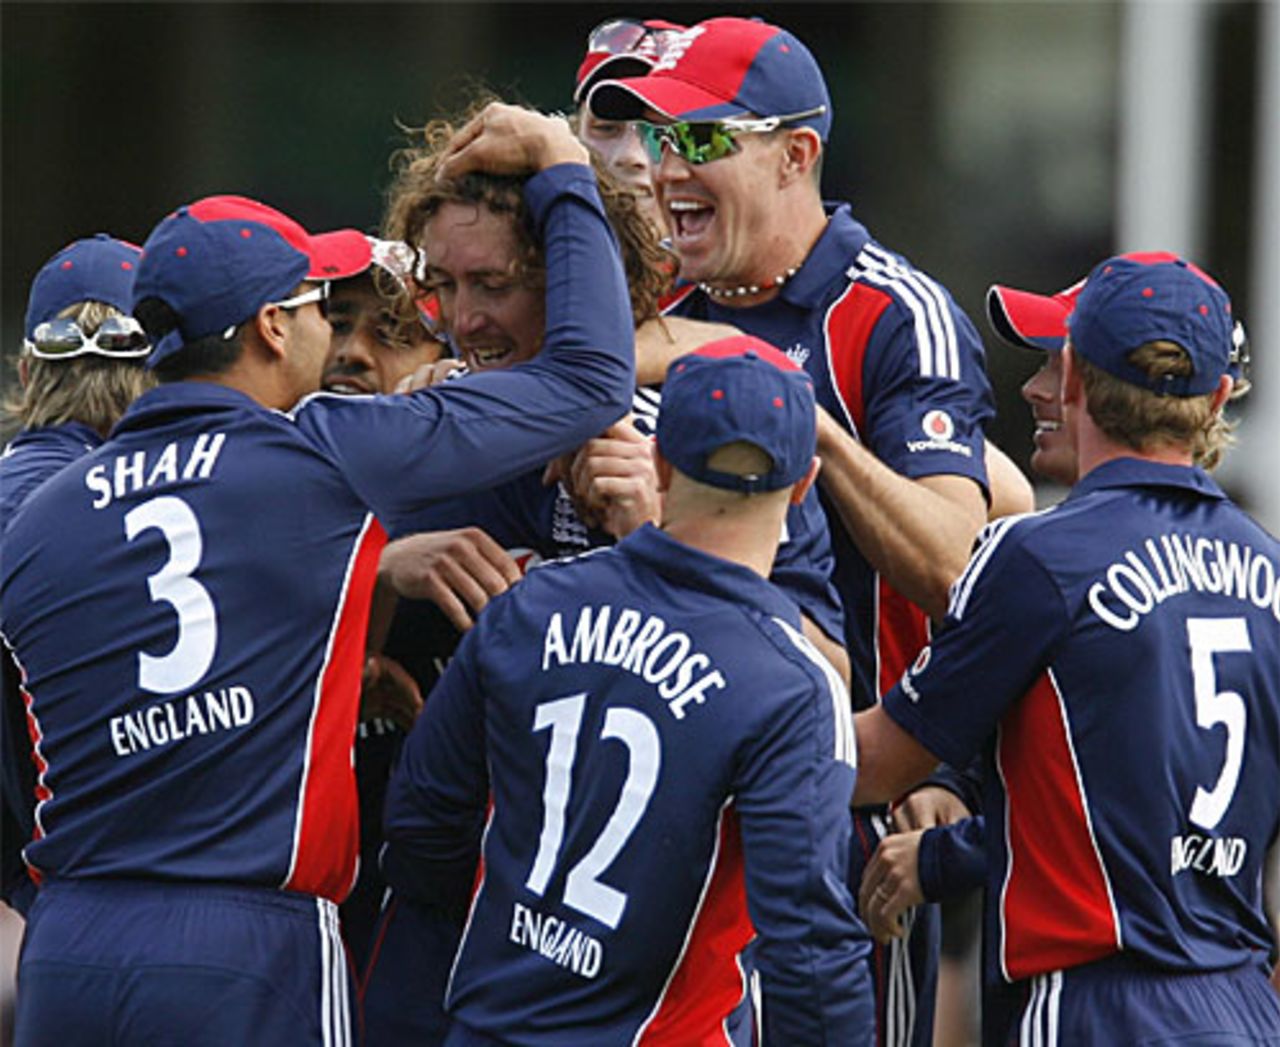 Mobbed: Ryan Sidebottom's surrounded by happy team-mates for crucial strikes, England v New Zealand, 4th ODI, The Oval, June 25, 2008